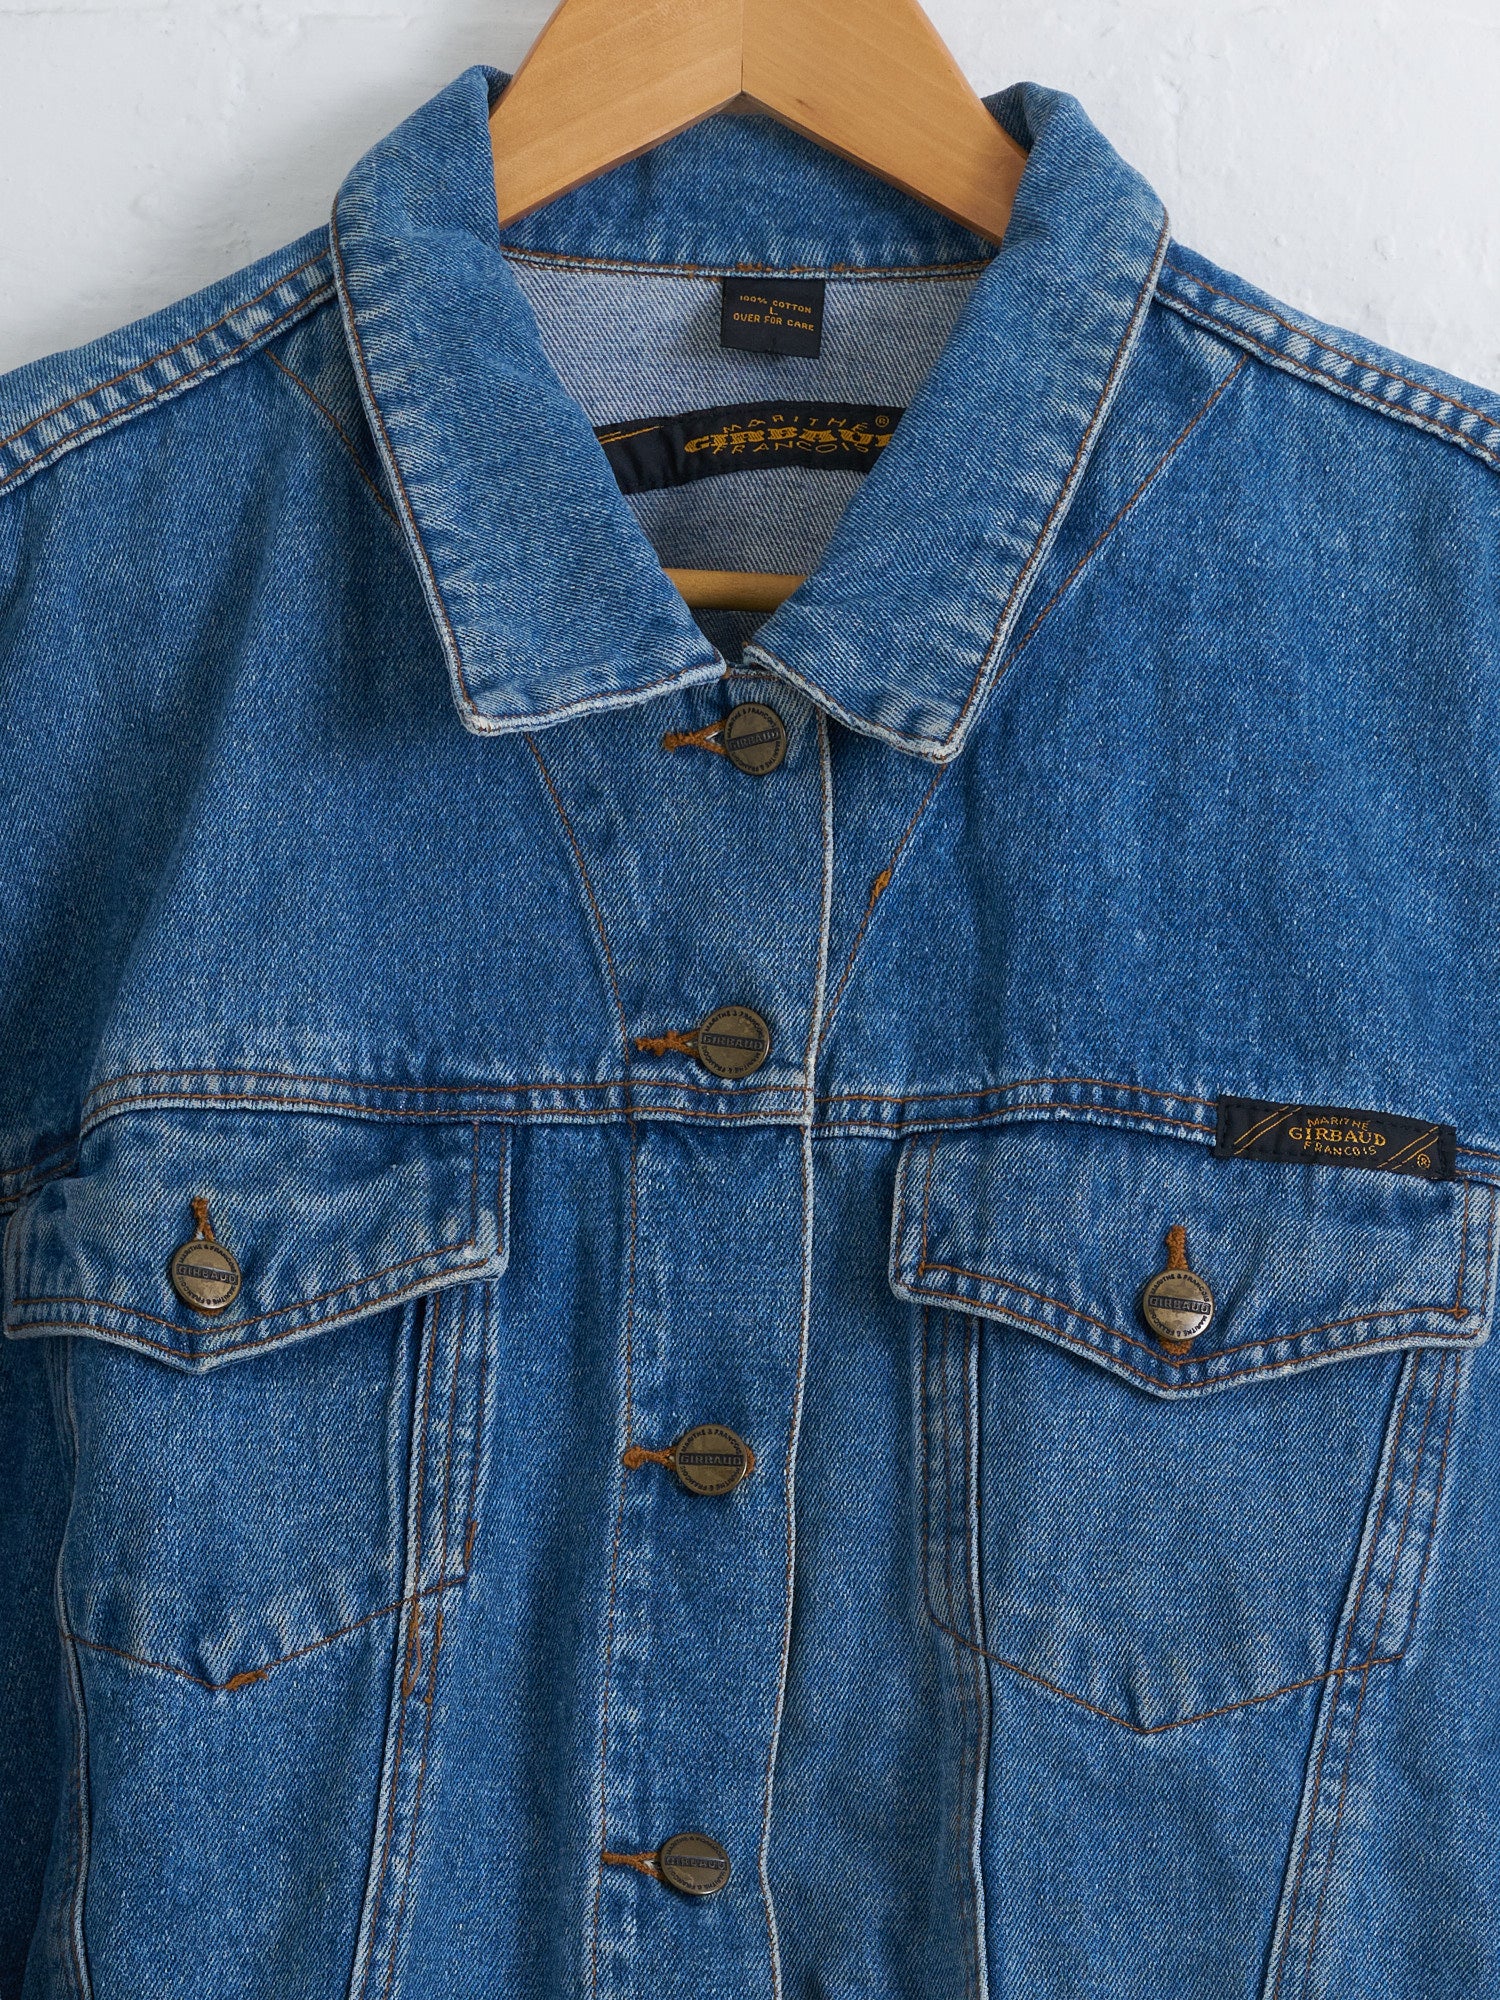 Marithe Francois Girbaud stonewashed denim jacket with crumbling brand patch - L